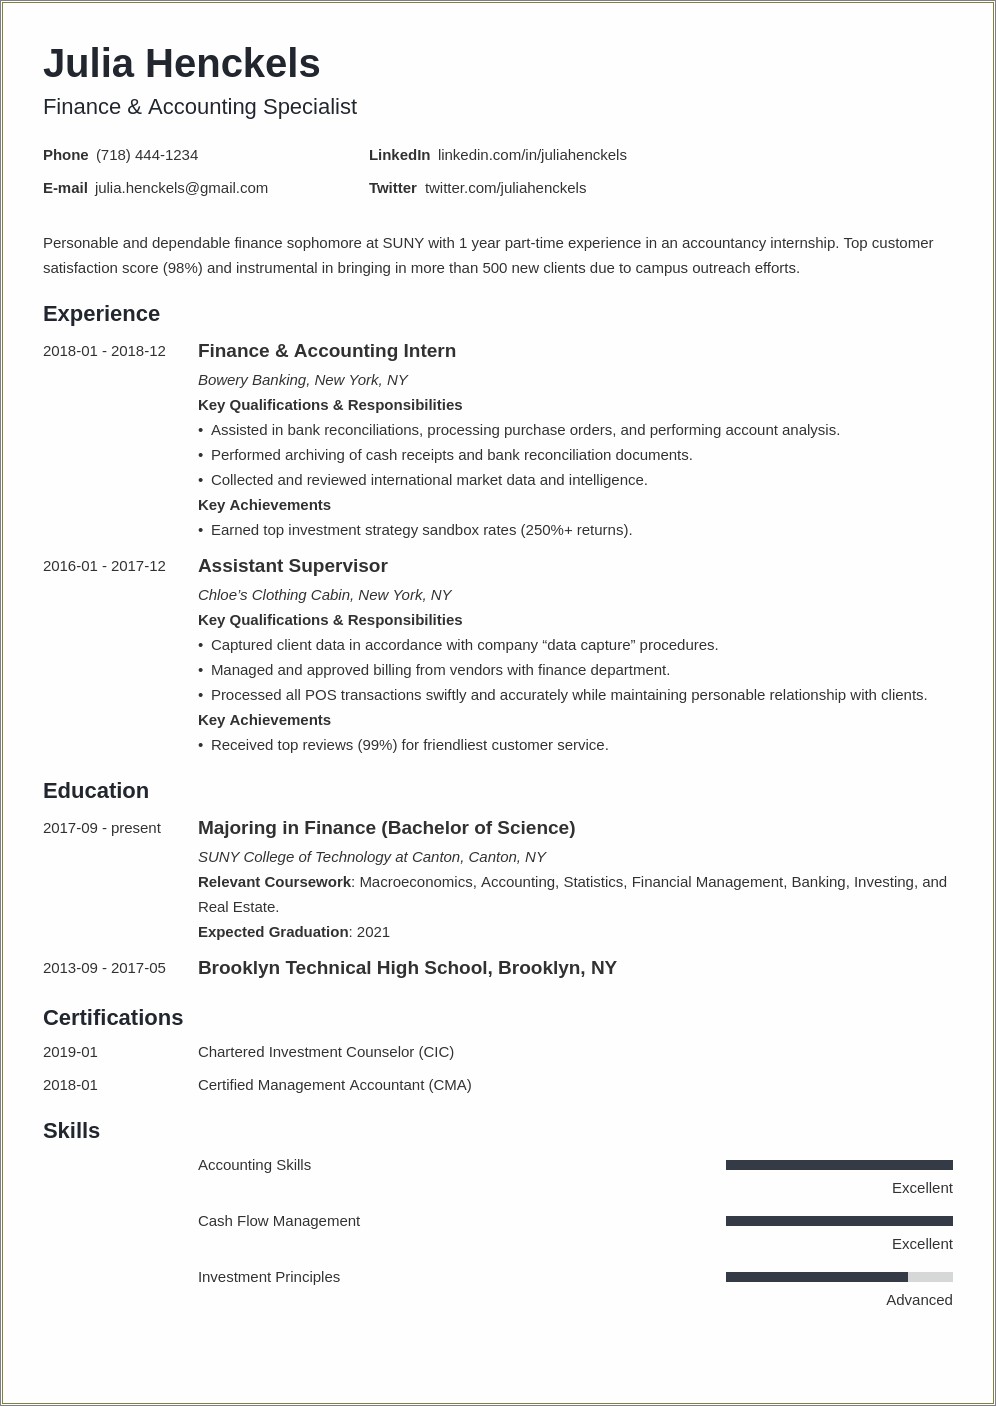 Resume Objectives Based On My College Education